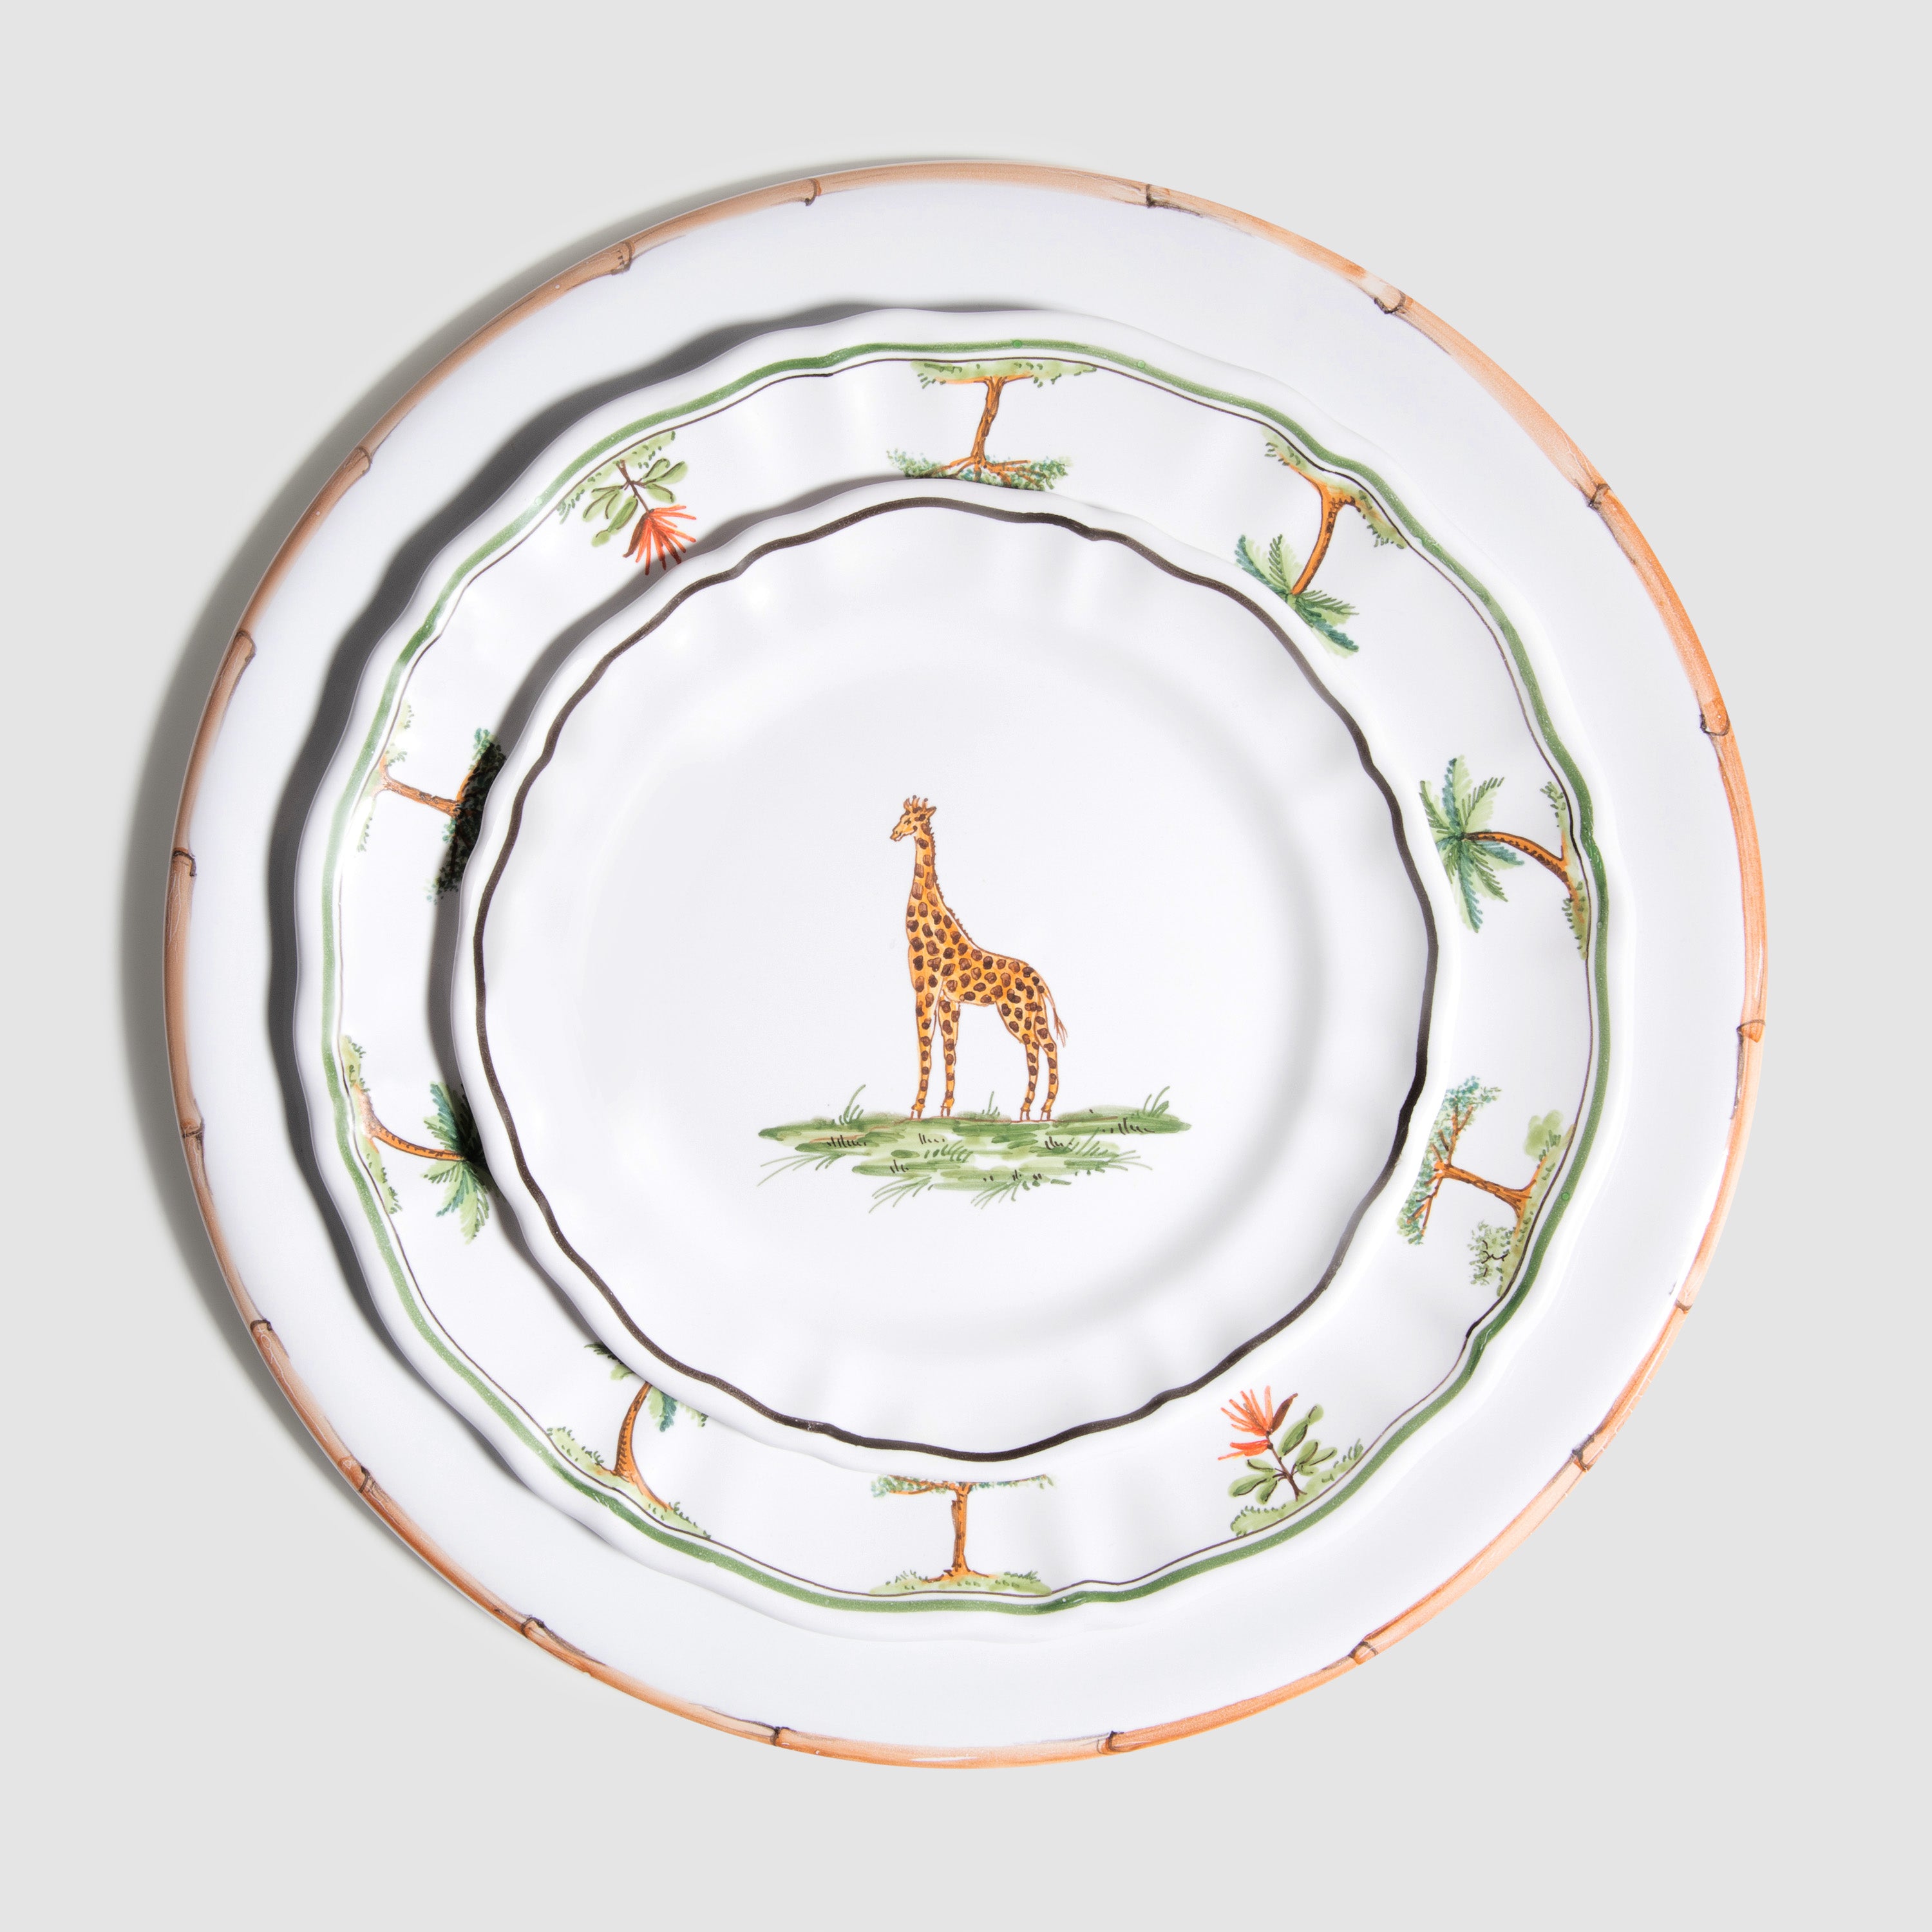 Animaux de la Savane Dessert/Side Plate styled ontop of La Savane Dinner Plate and Bamboo Charger Plate